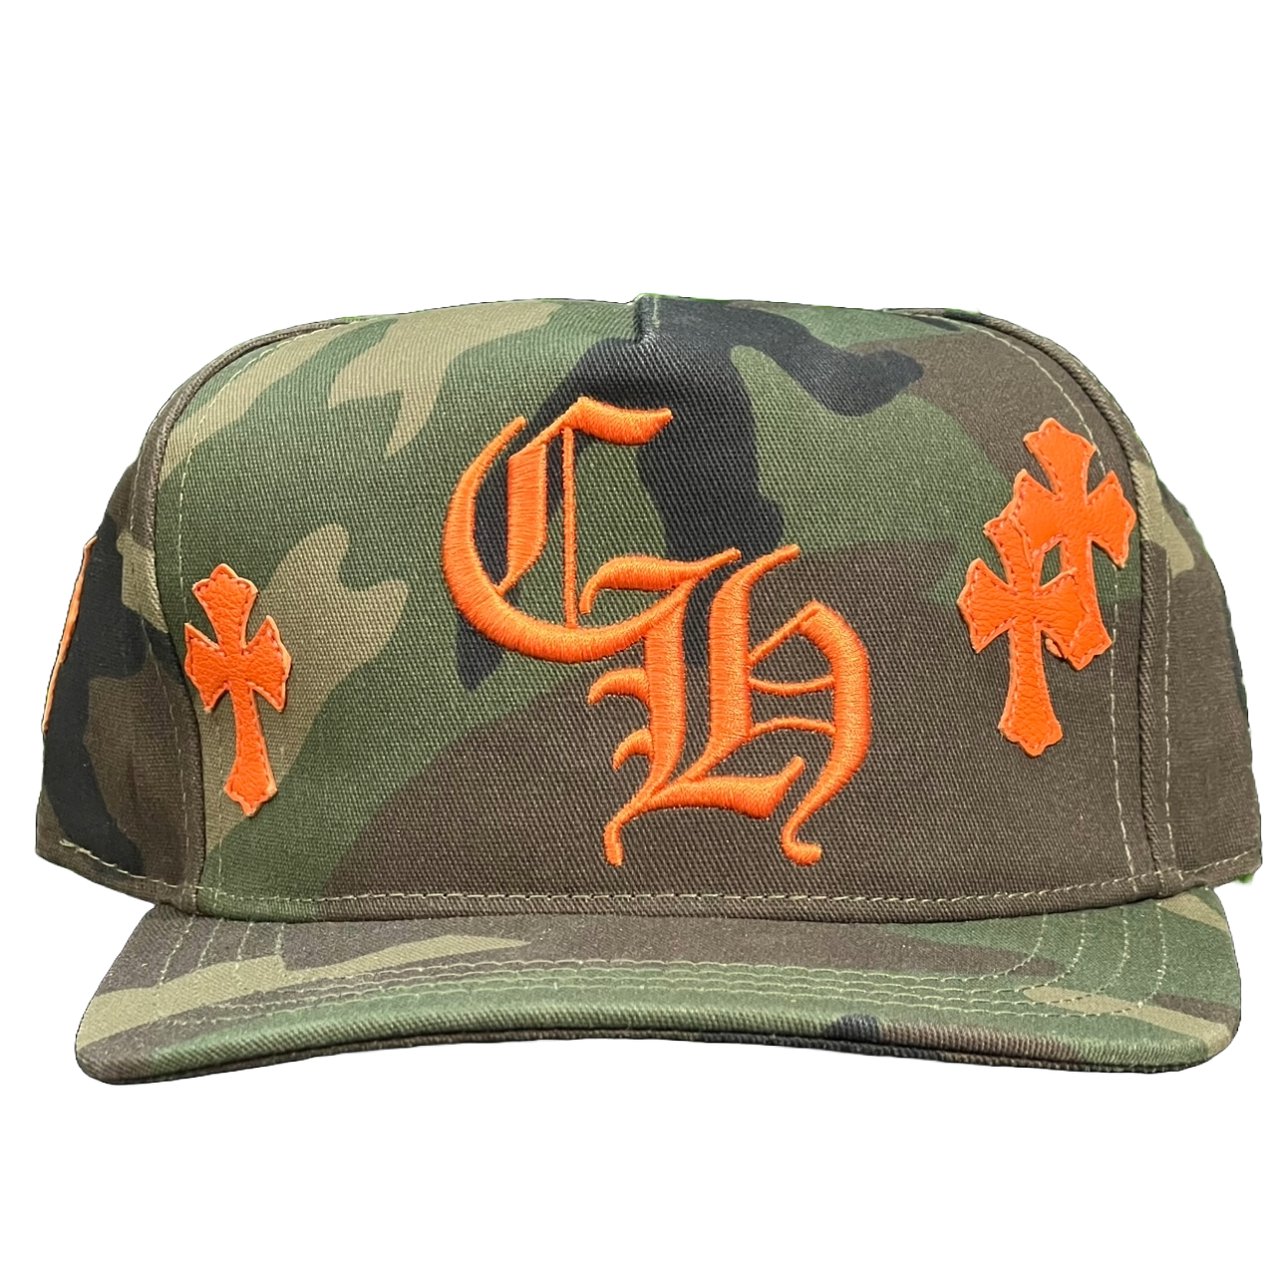 Chrome Hearts Leather Patches Snapback Hat Camo / Orange - Supra Sneakers